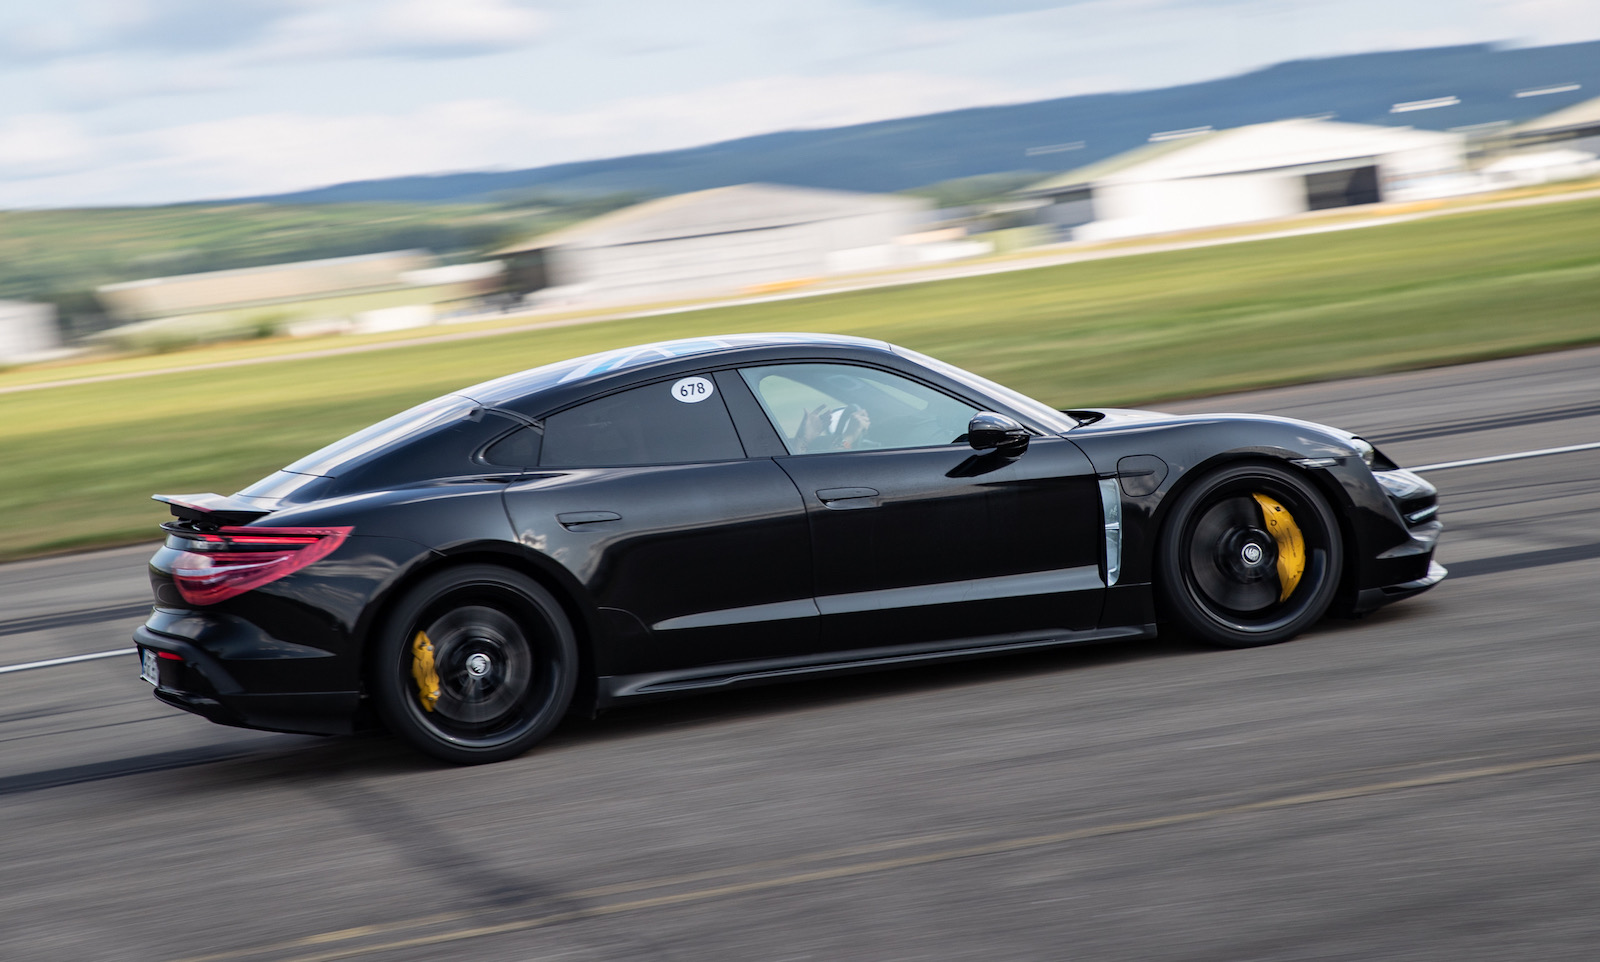 Porsche Taycan can do sub-10sec 0-200km/h, repeatedly (video)